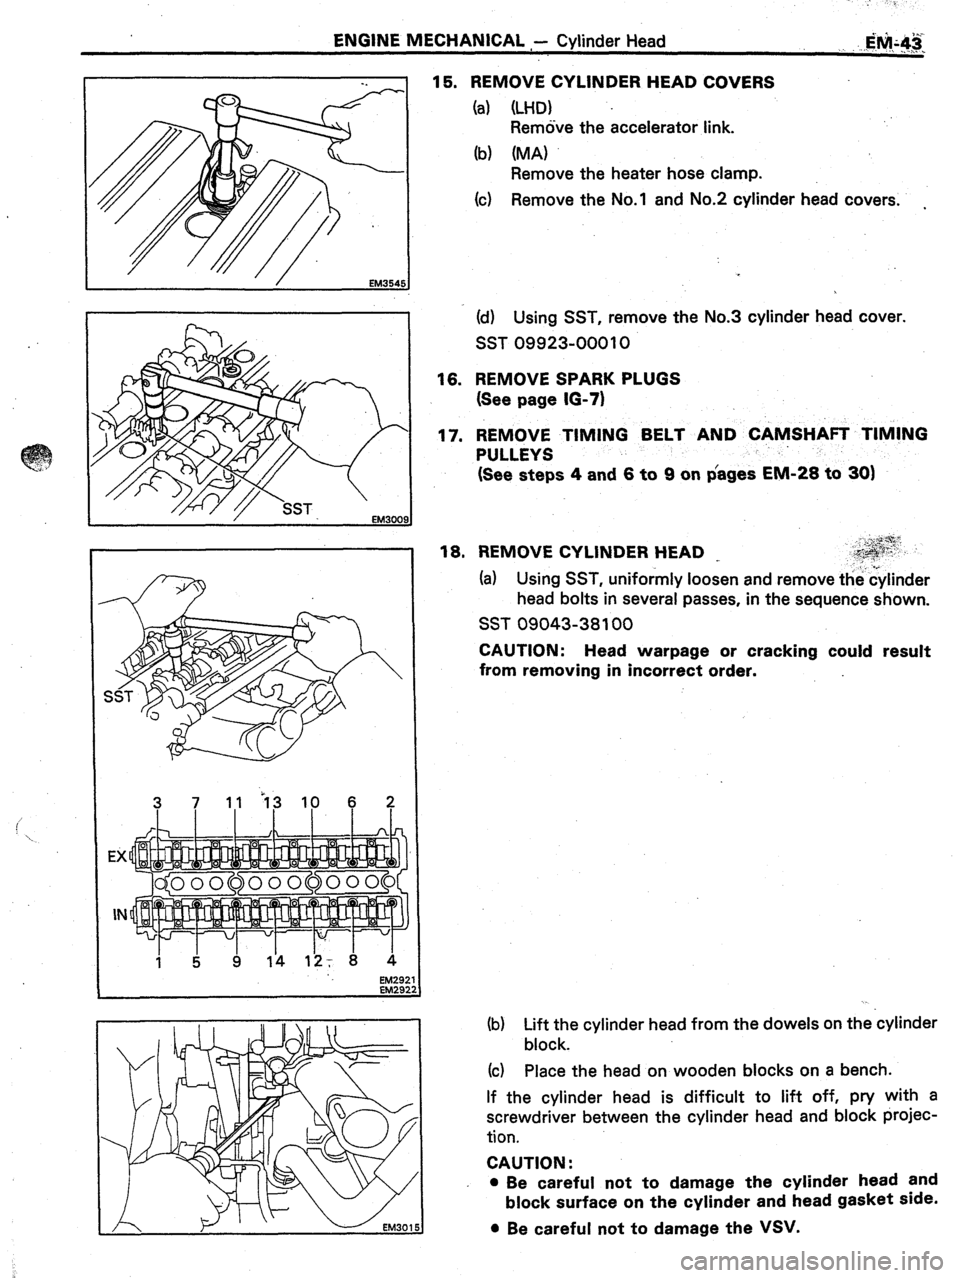 TOYOTA CELICA 1987  Service Repair Manual ENGINE MECHANICAL -- Cylinder Head 
I 
 
15. REMOVE CYLINDER HEAD COVERS 
(a) (LHD) 
Remove the accelerator link. 
(b) (MA) 
Remove the heater hose clamp. 
(c) Remove the No.1 and No.2 cylinder head c